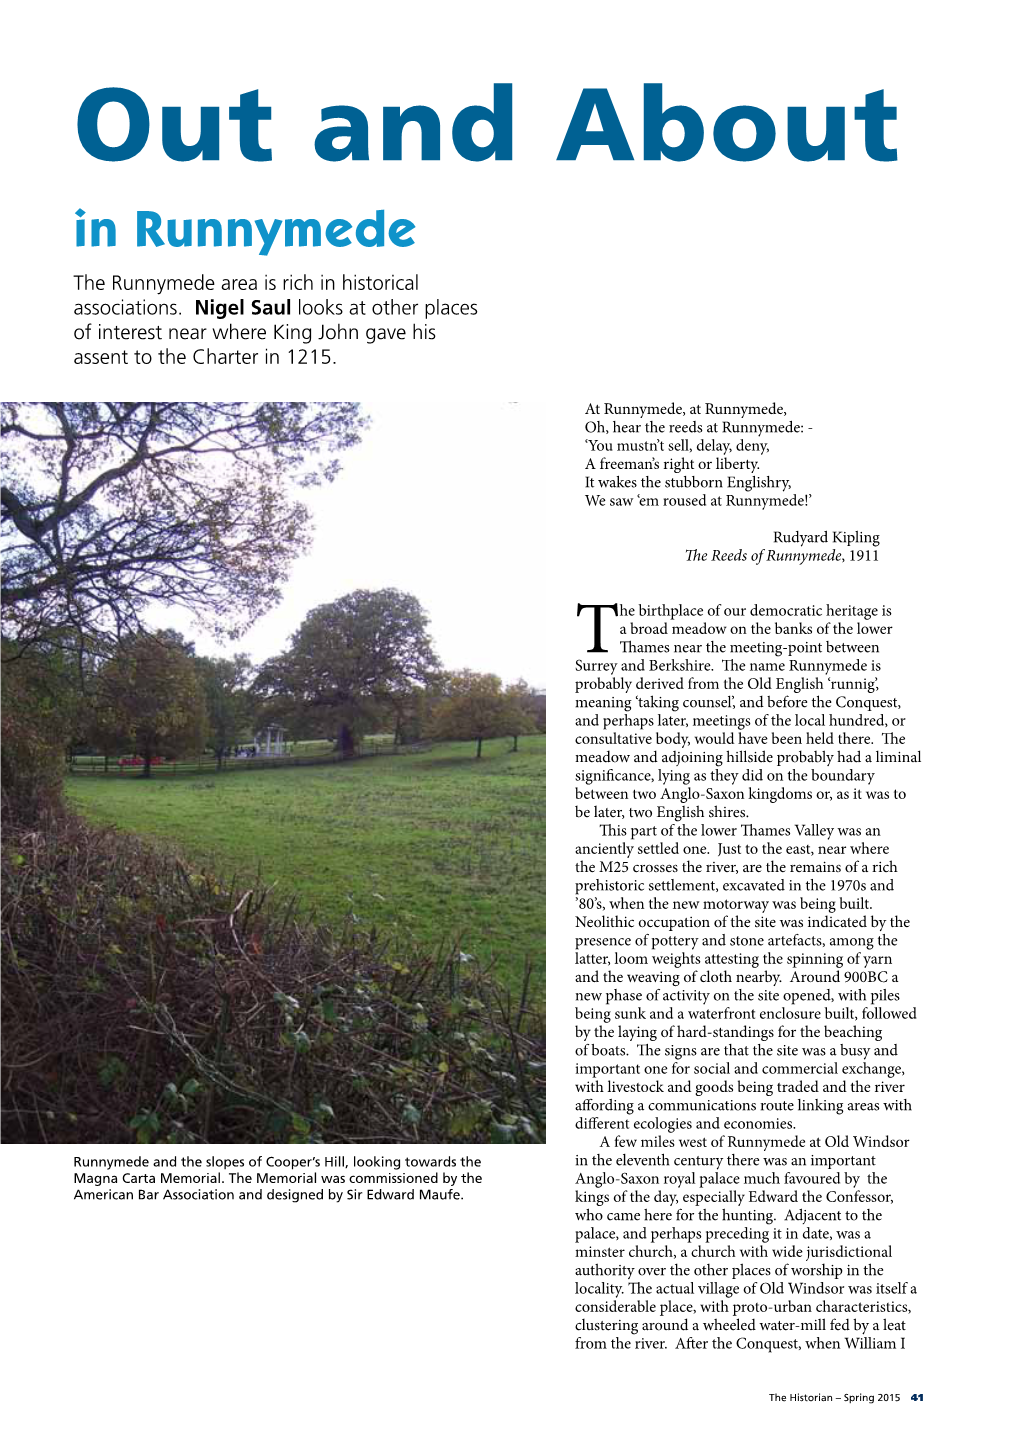 Out and About in Runnymede the Runnymede Area Is Rich in Historical Associations